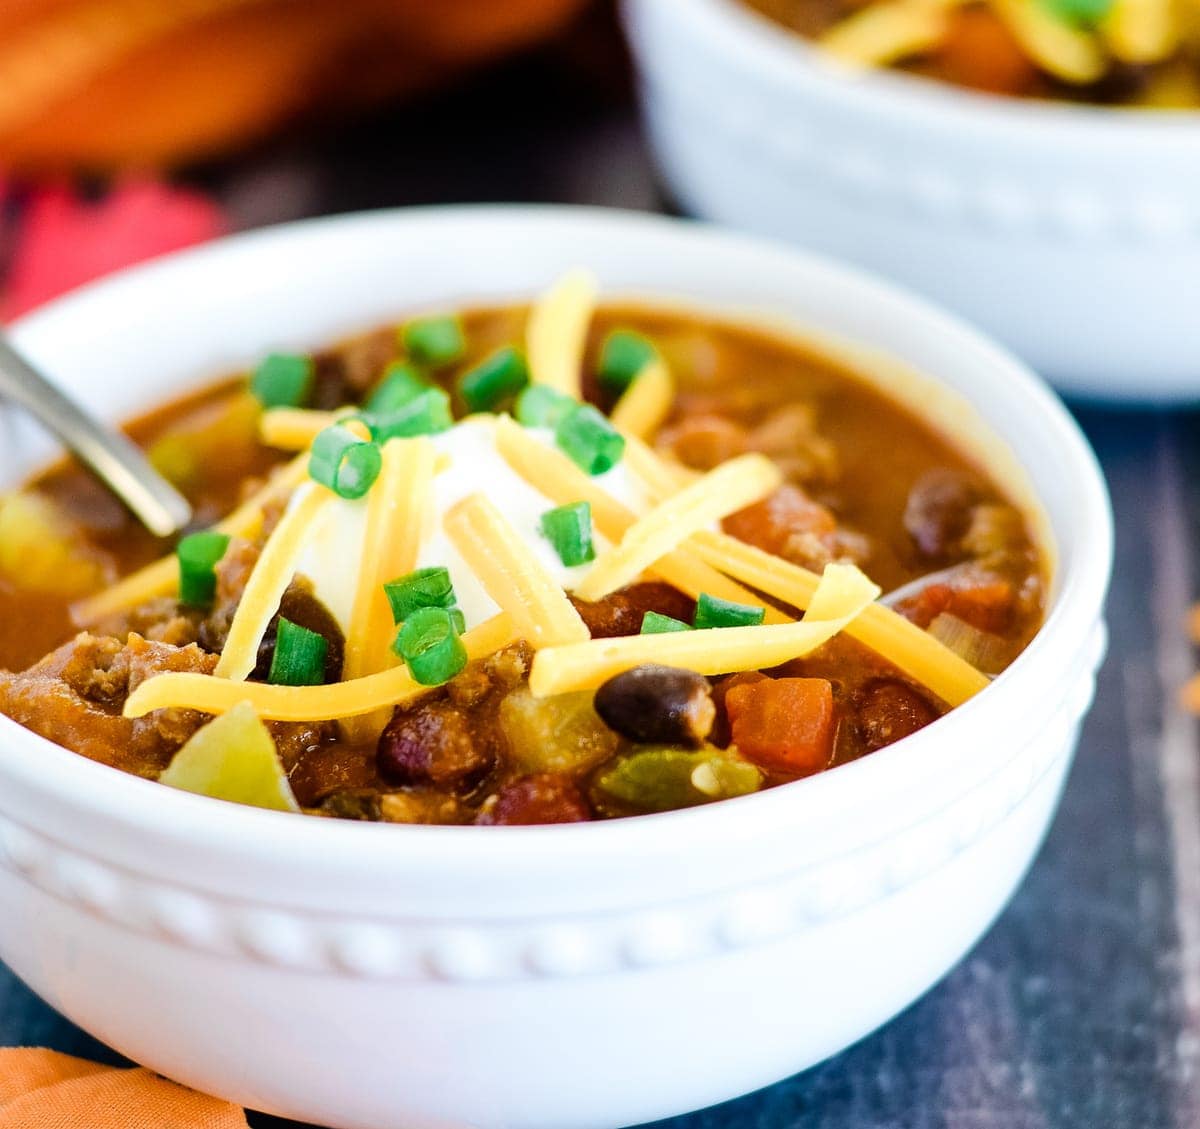 Fall dinner ideas - bowl of pumpkin chili topped with sour cream.